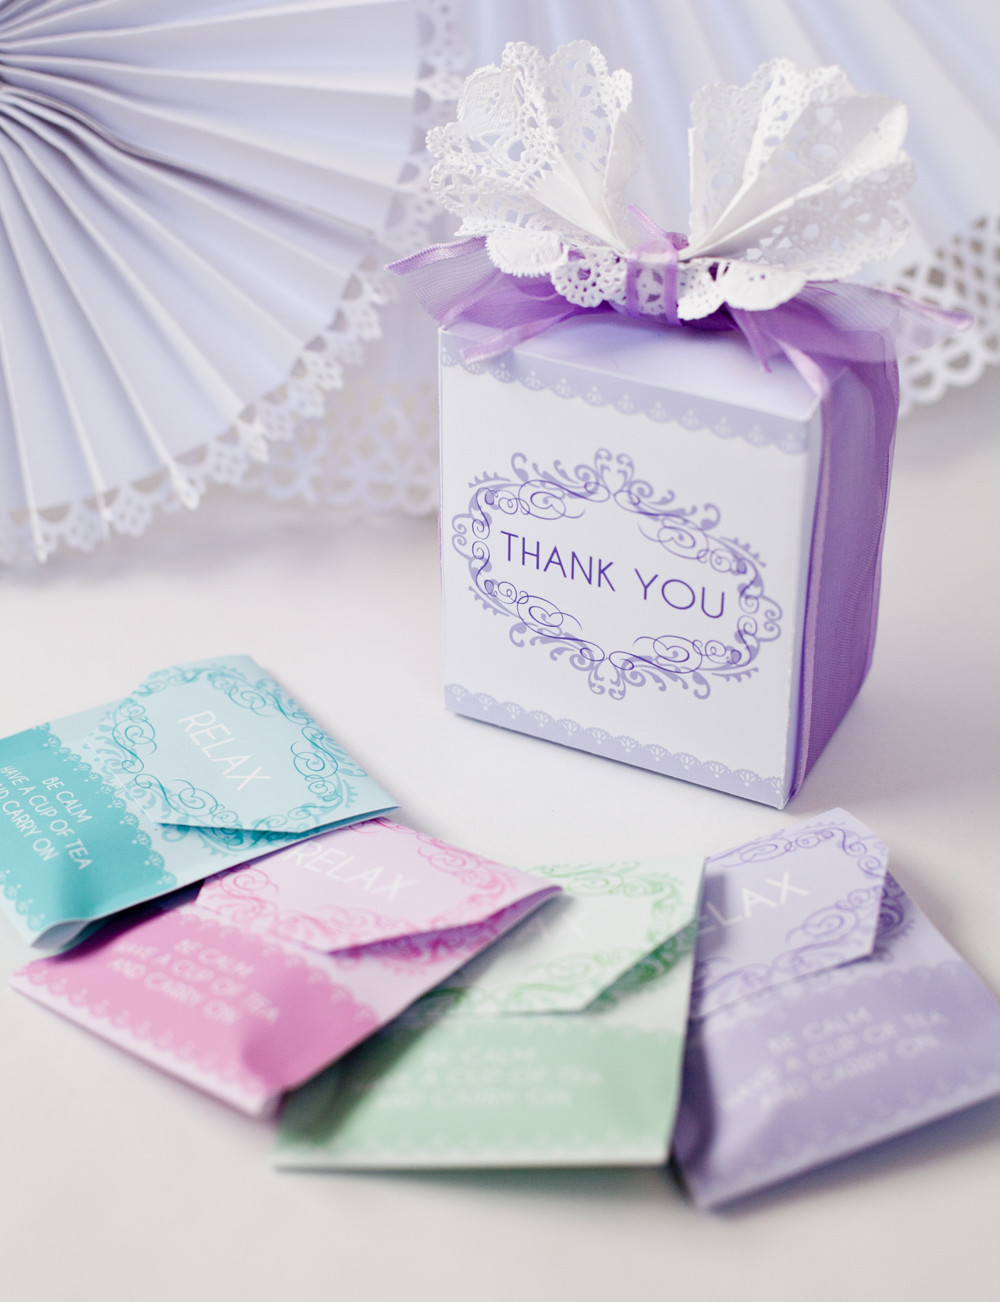 Party Favor Ideas For Baby Shower
 DIY Baby Shower Tea Party Favor Free Printable